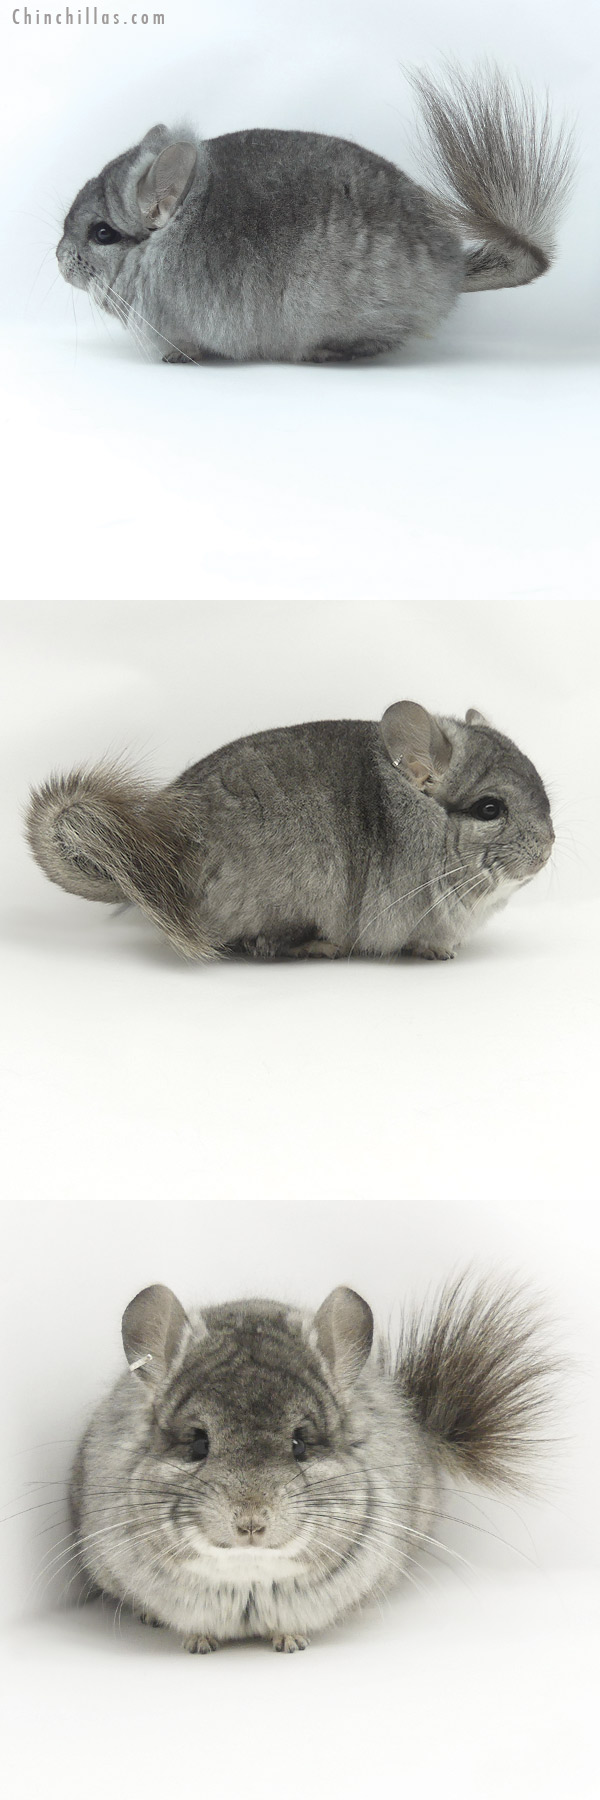 Chinchilla or related item offered for sale or export on Chinchillas.com - 20054 Standard  Royal Persian Angora Male Chinchilla